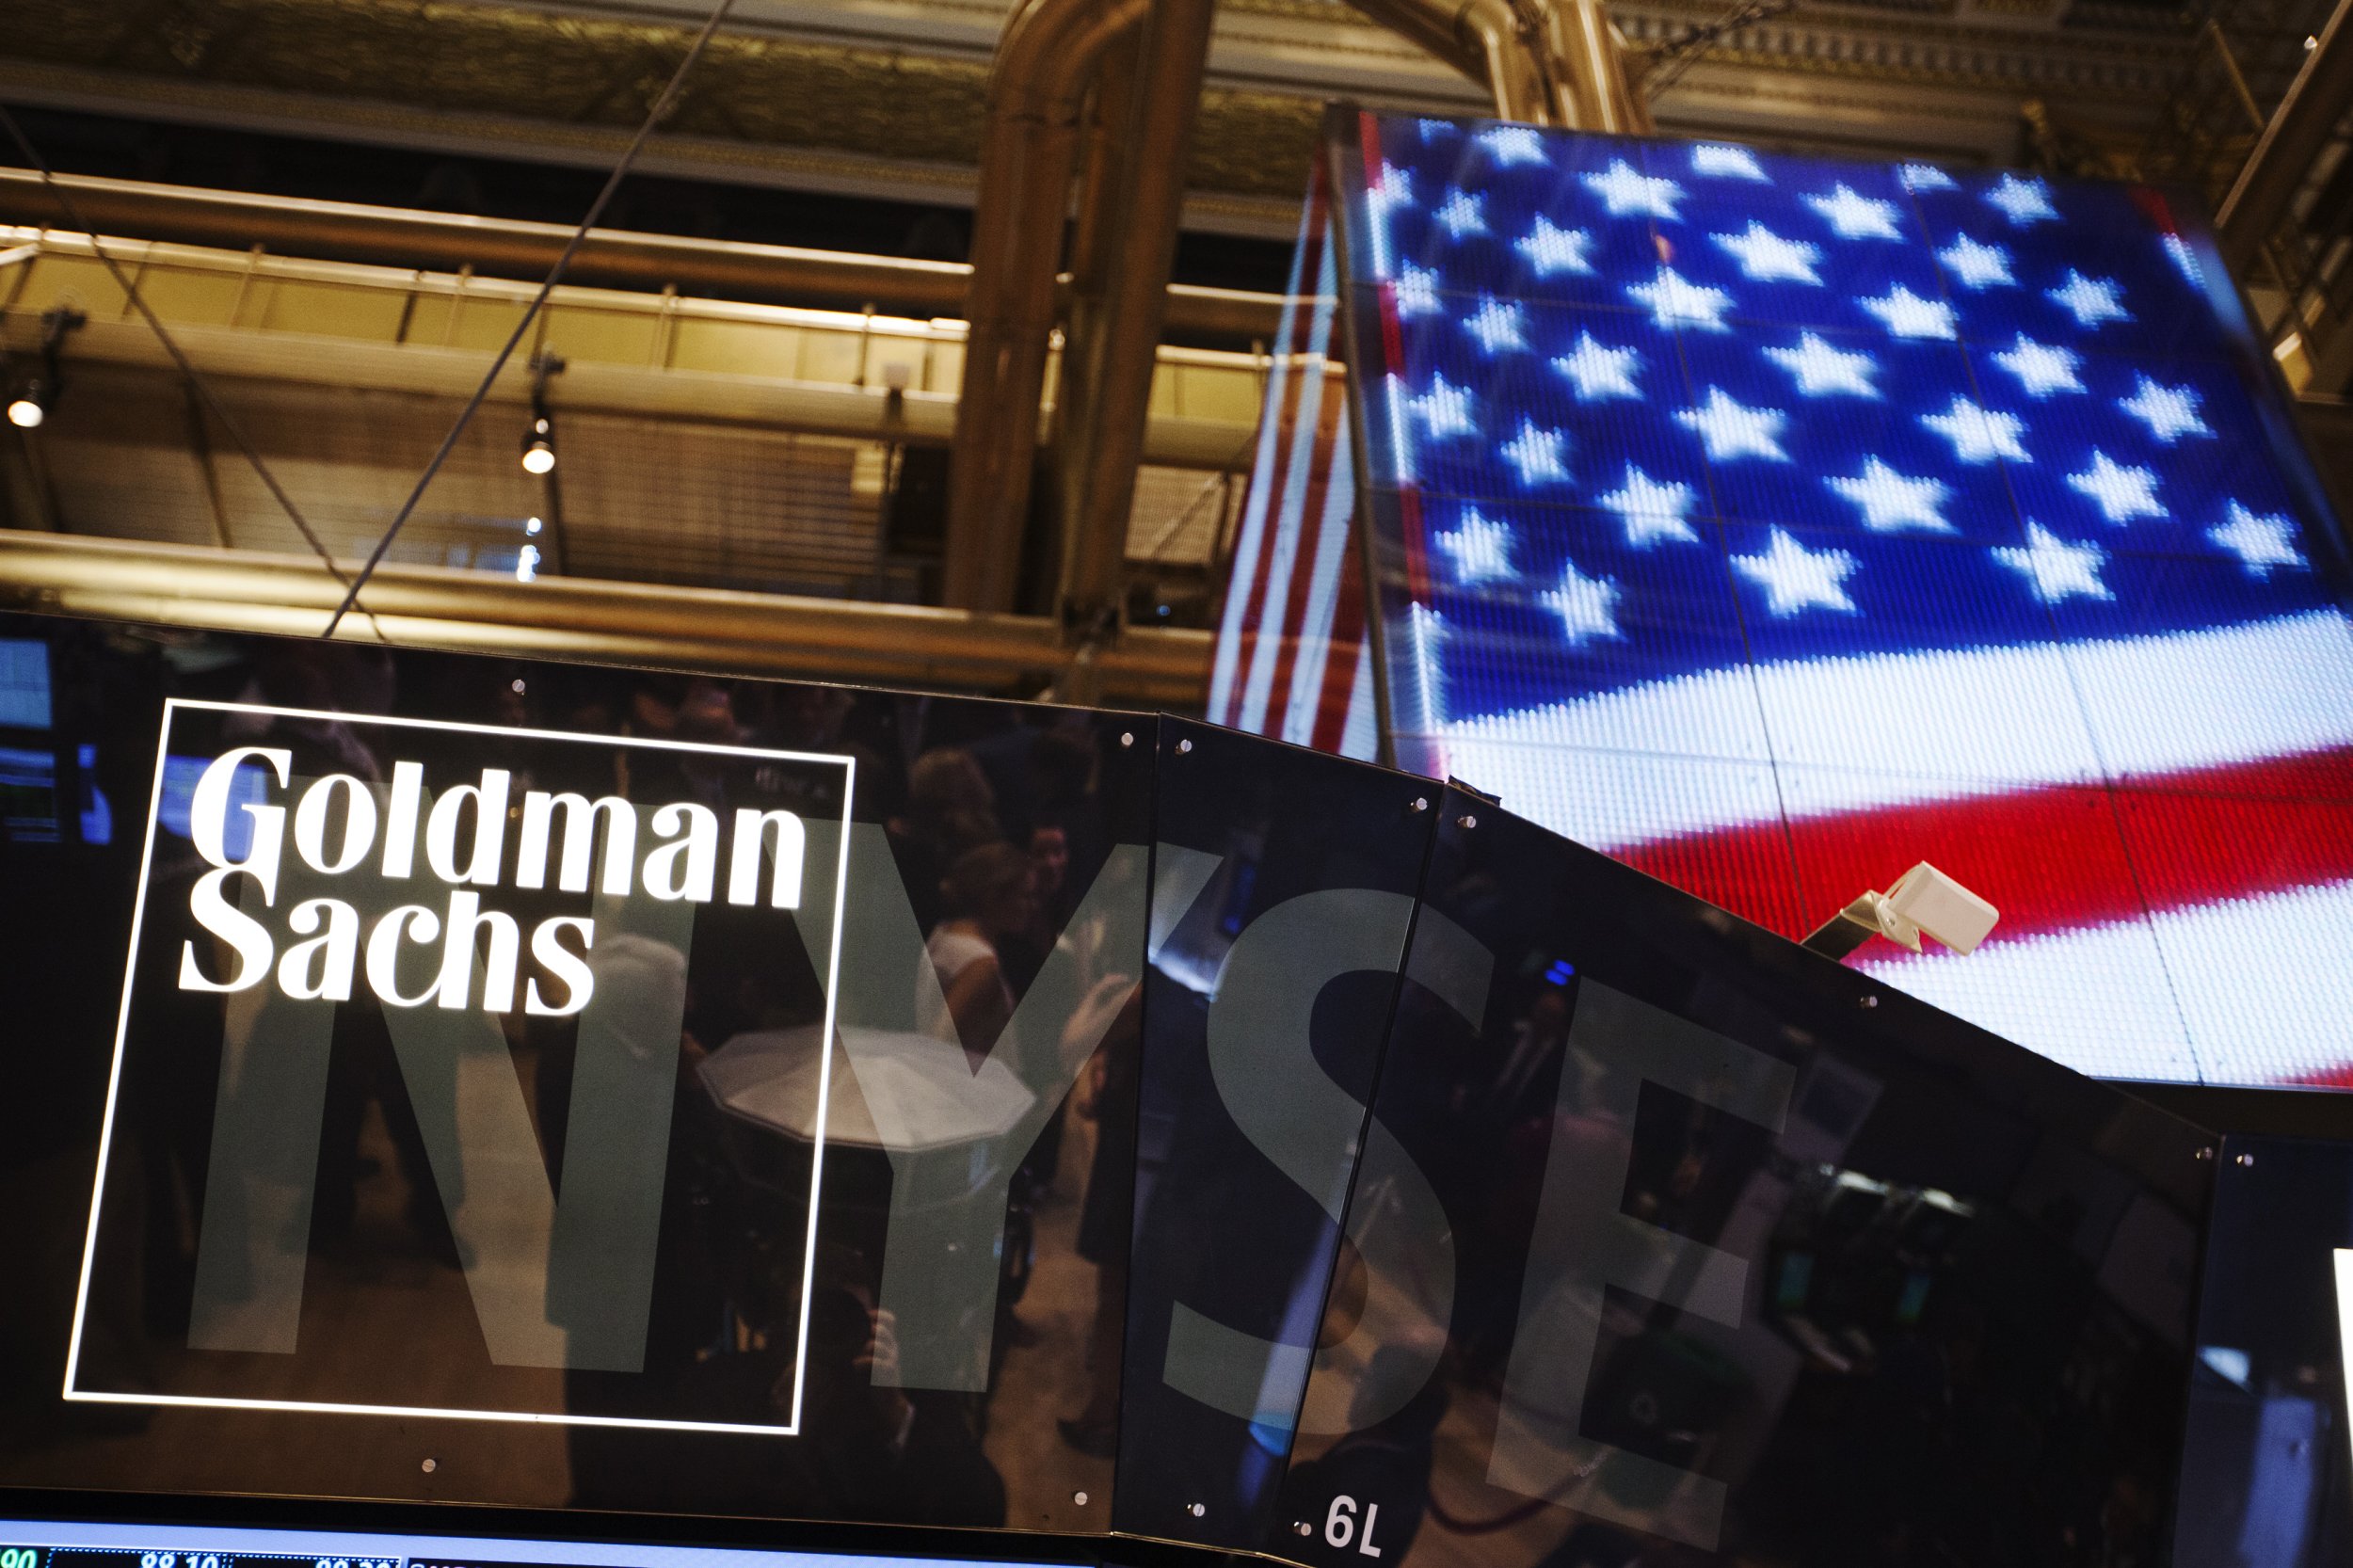 Goldman Sachs Gender Discrimination Lawsuit 7 Damning Claims From Sexual Assault To Hiring